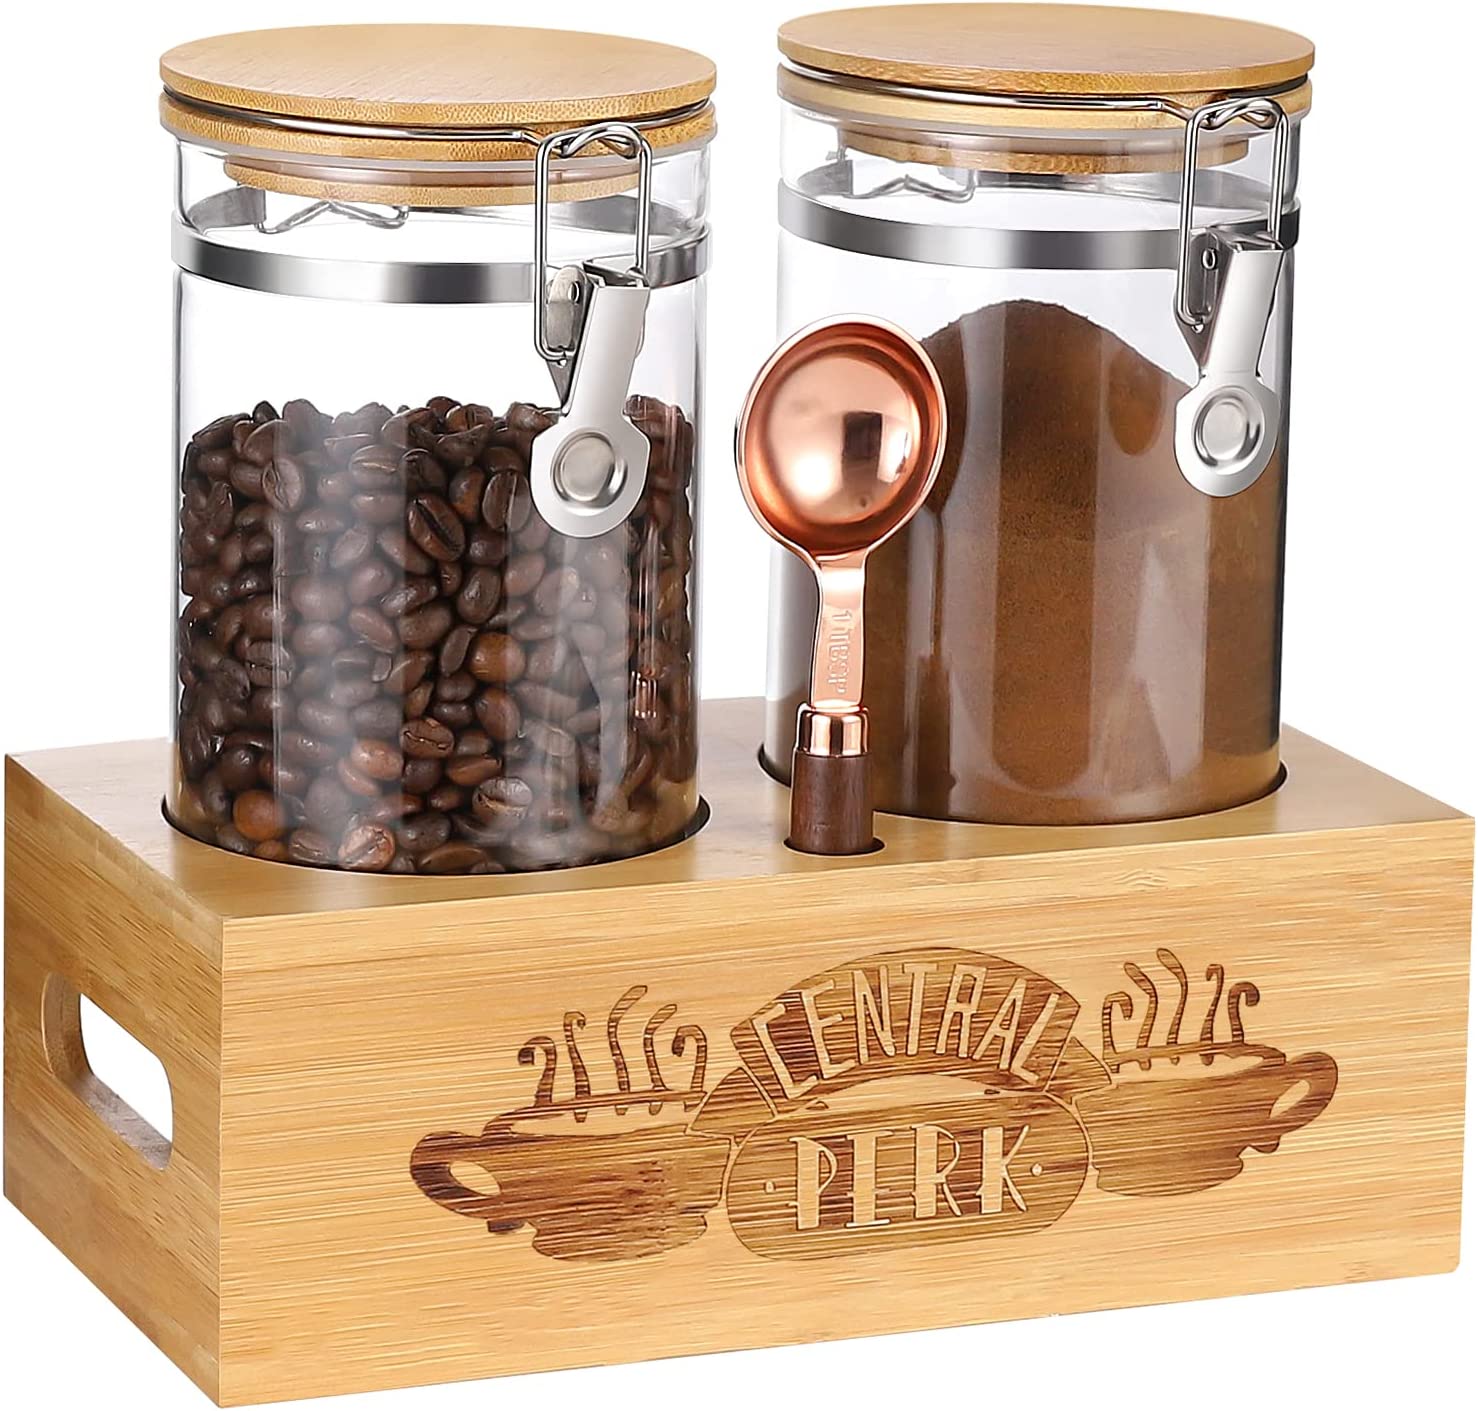 Glass Coffee Containers with Shelf Printed Coffee Bar- 2 Pcs 49oz